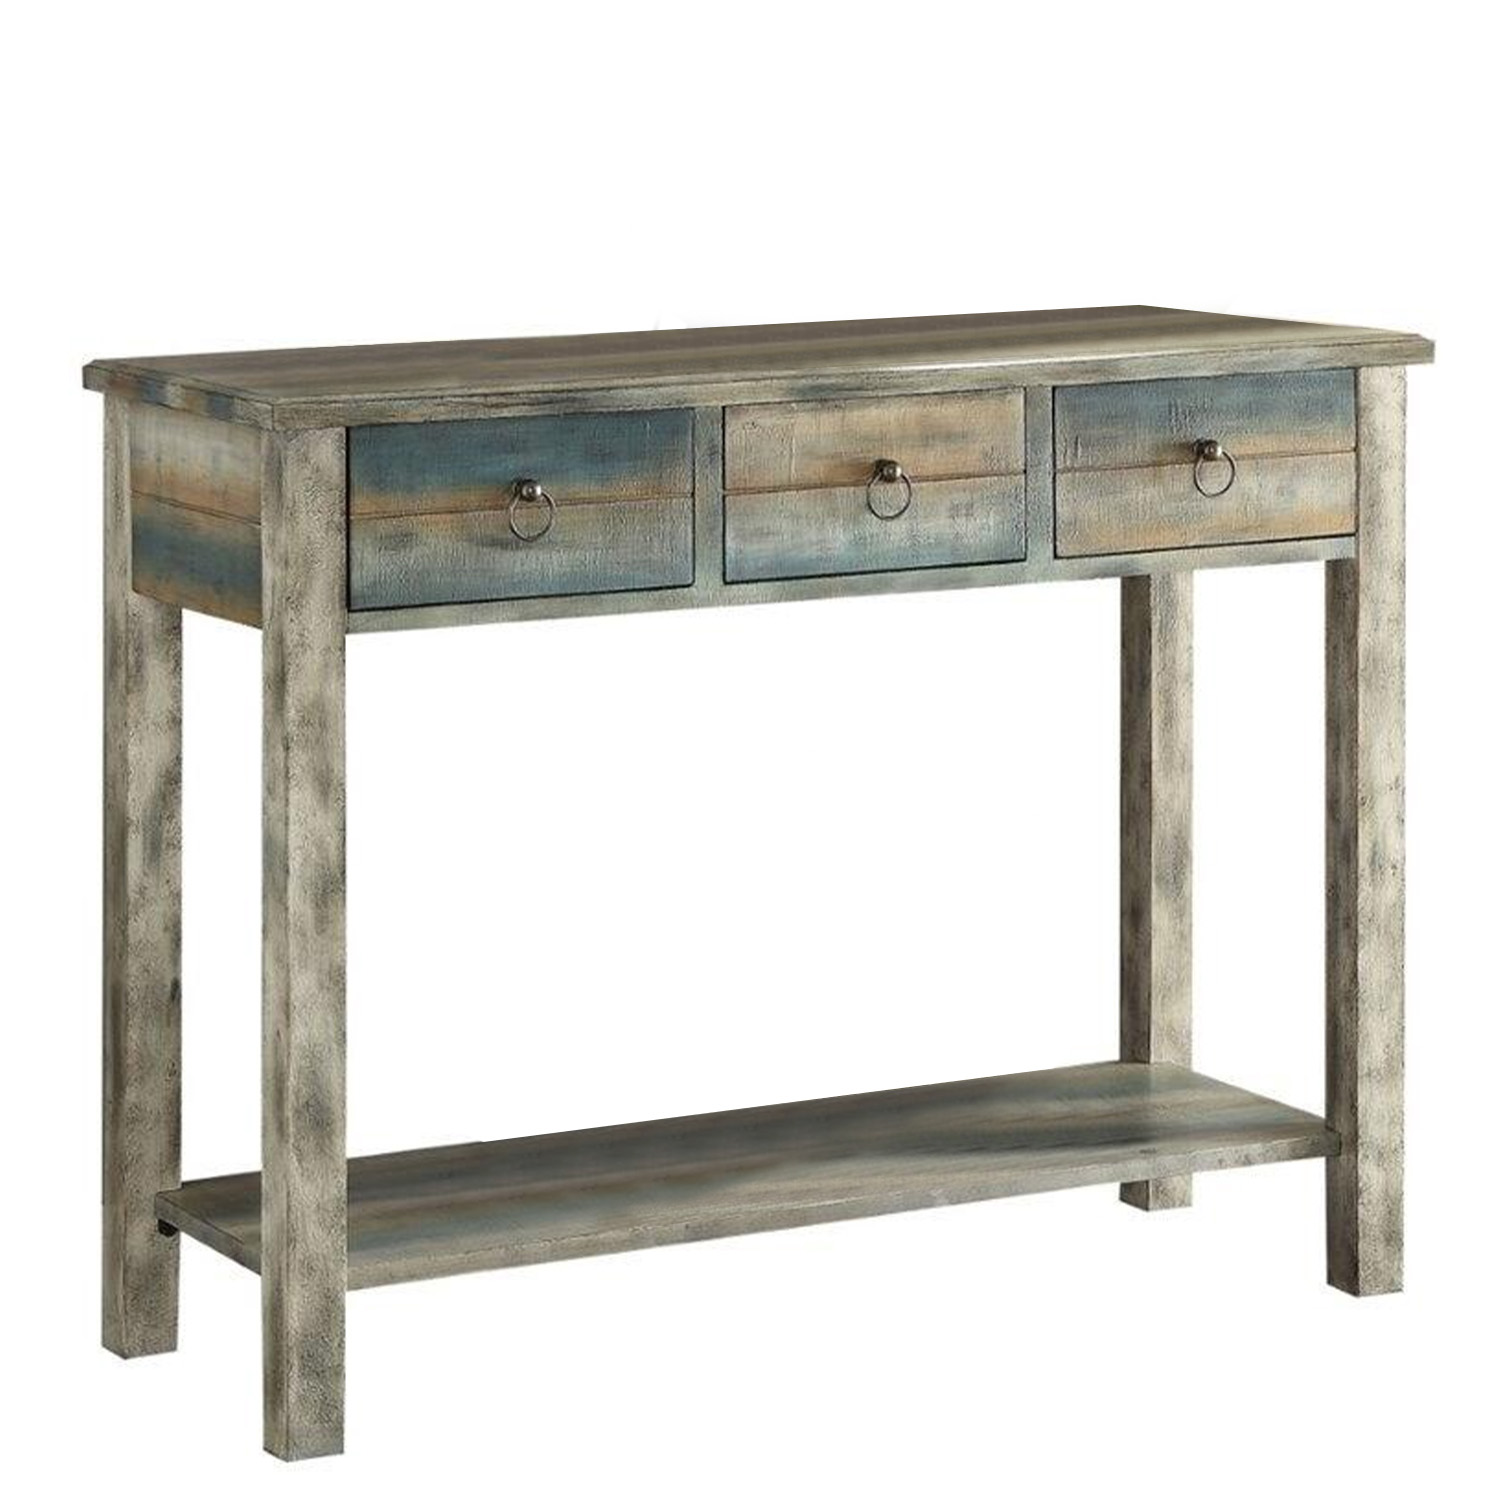 32" X 15" X 35" Antique Oak And Teal Wooden Console Table